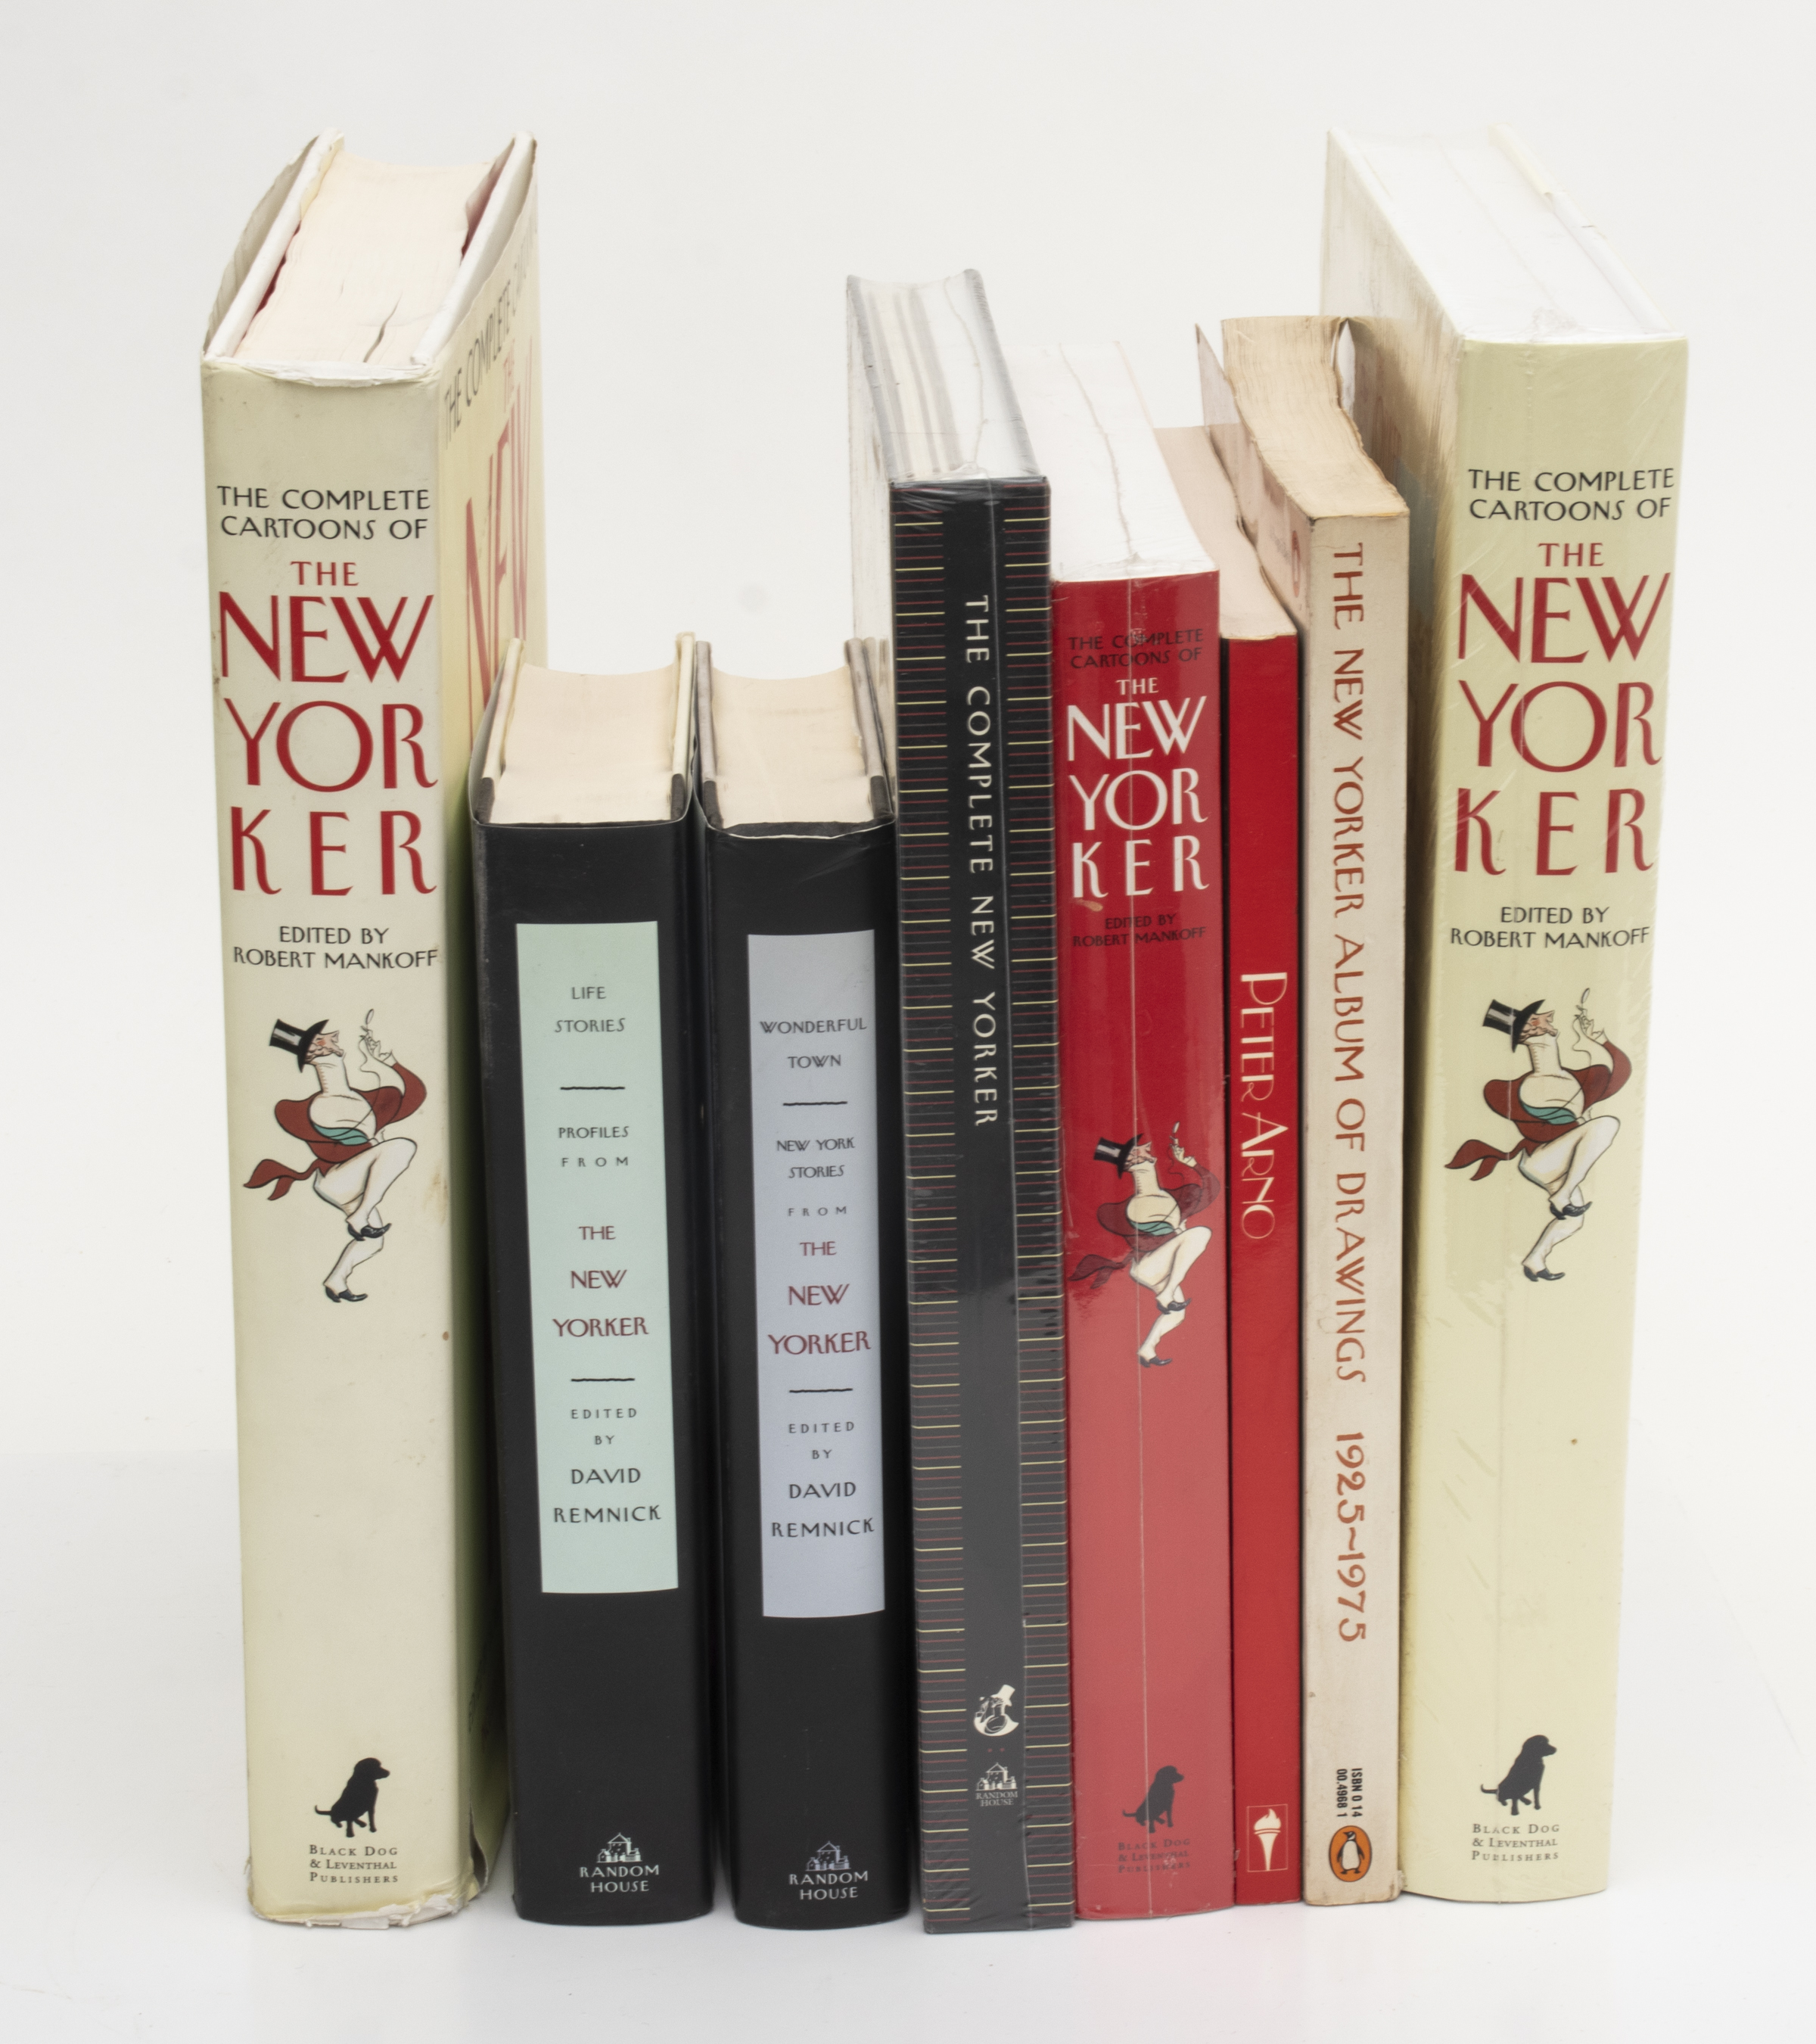 GROUP OF BOOKS ON THE NEW YORKER,